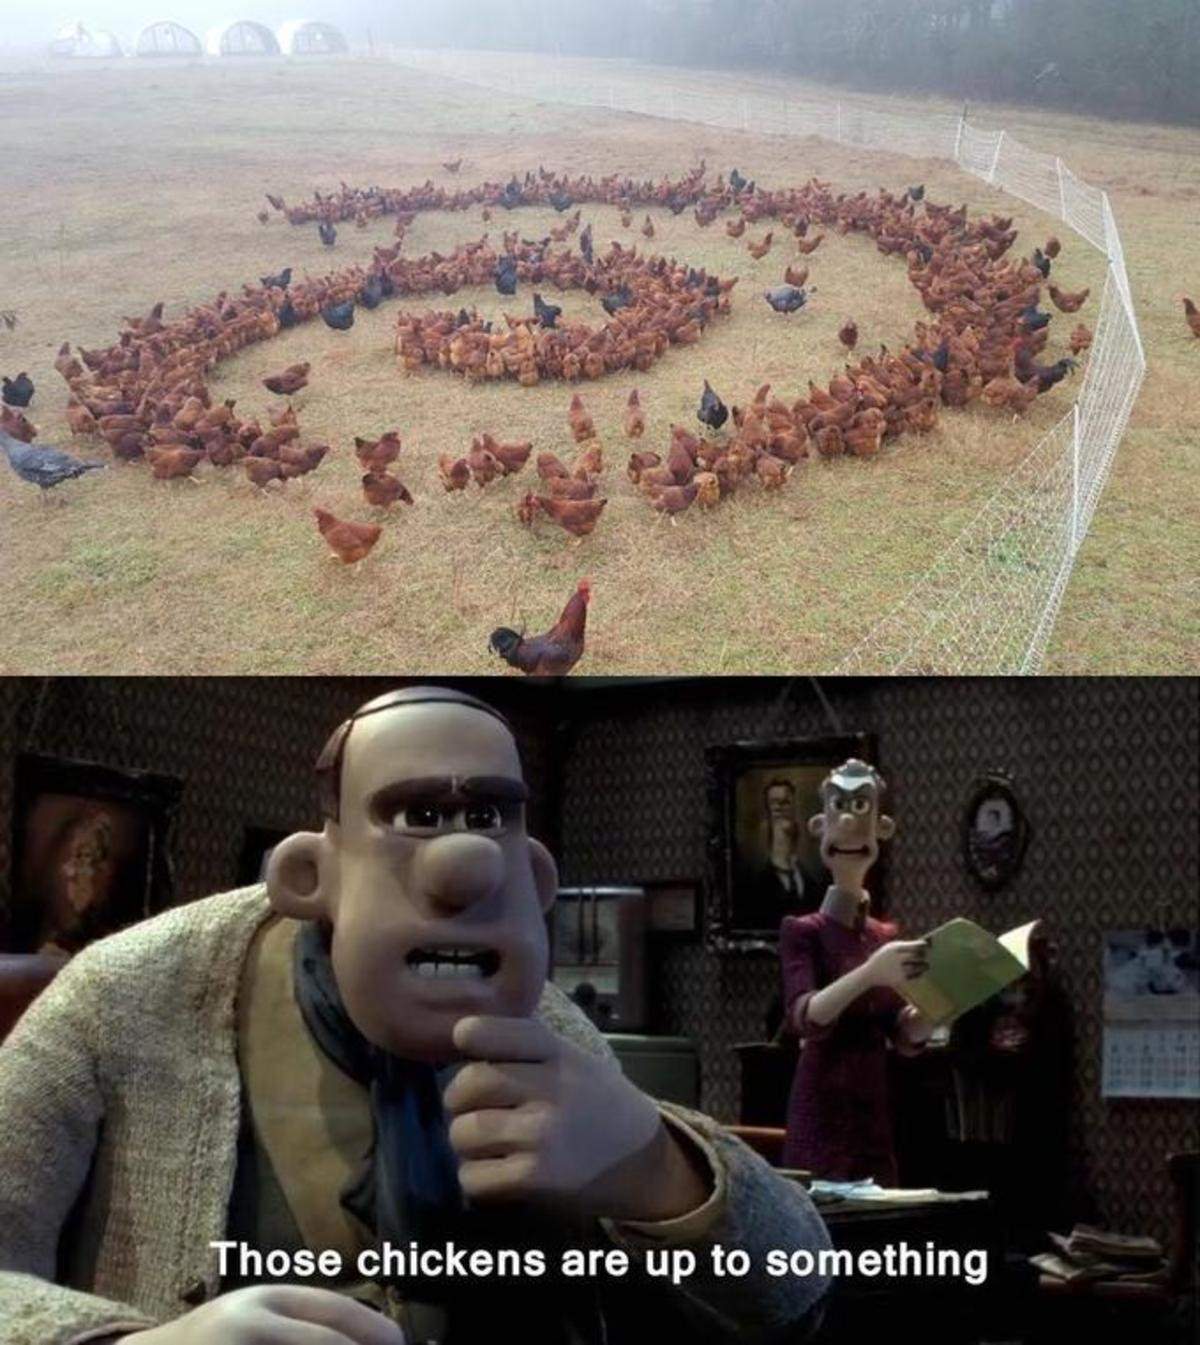 them chickens are up to something - Those chickens are up to something